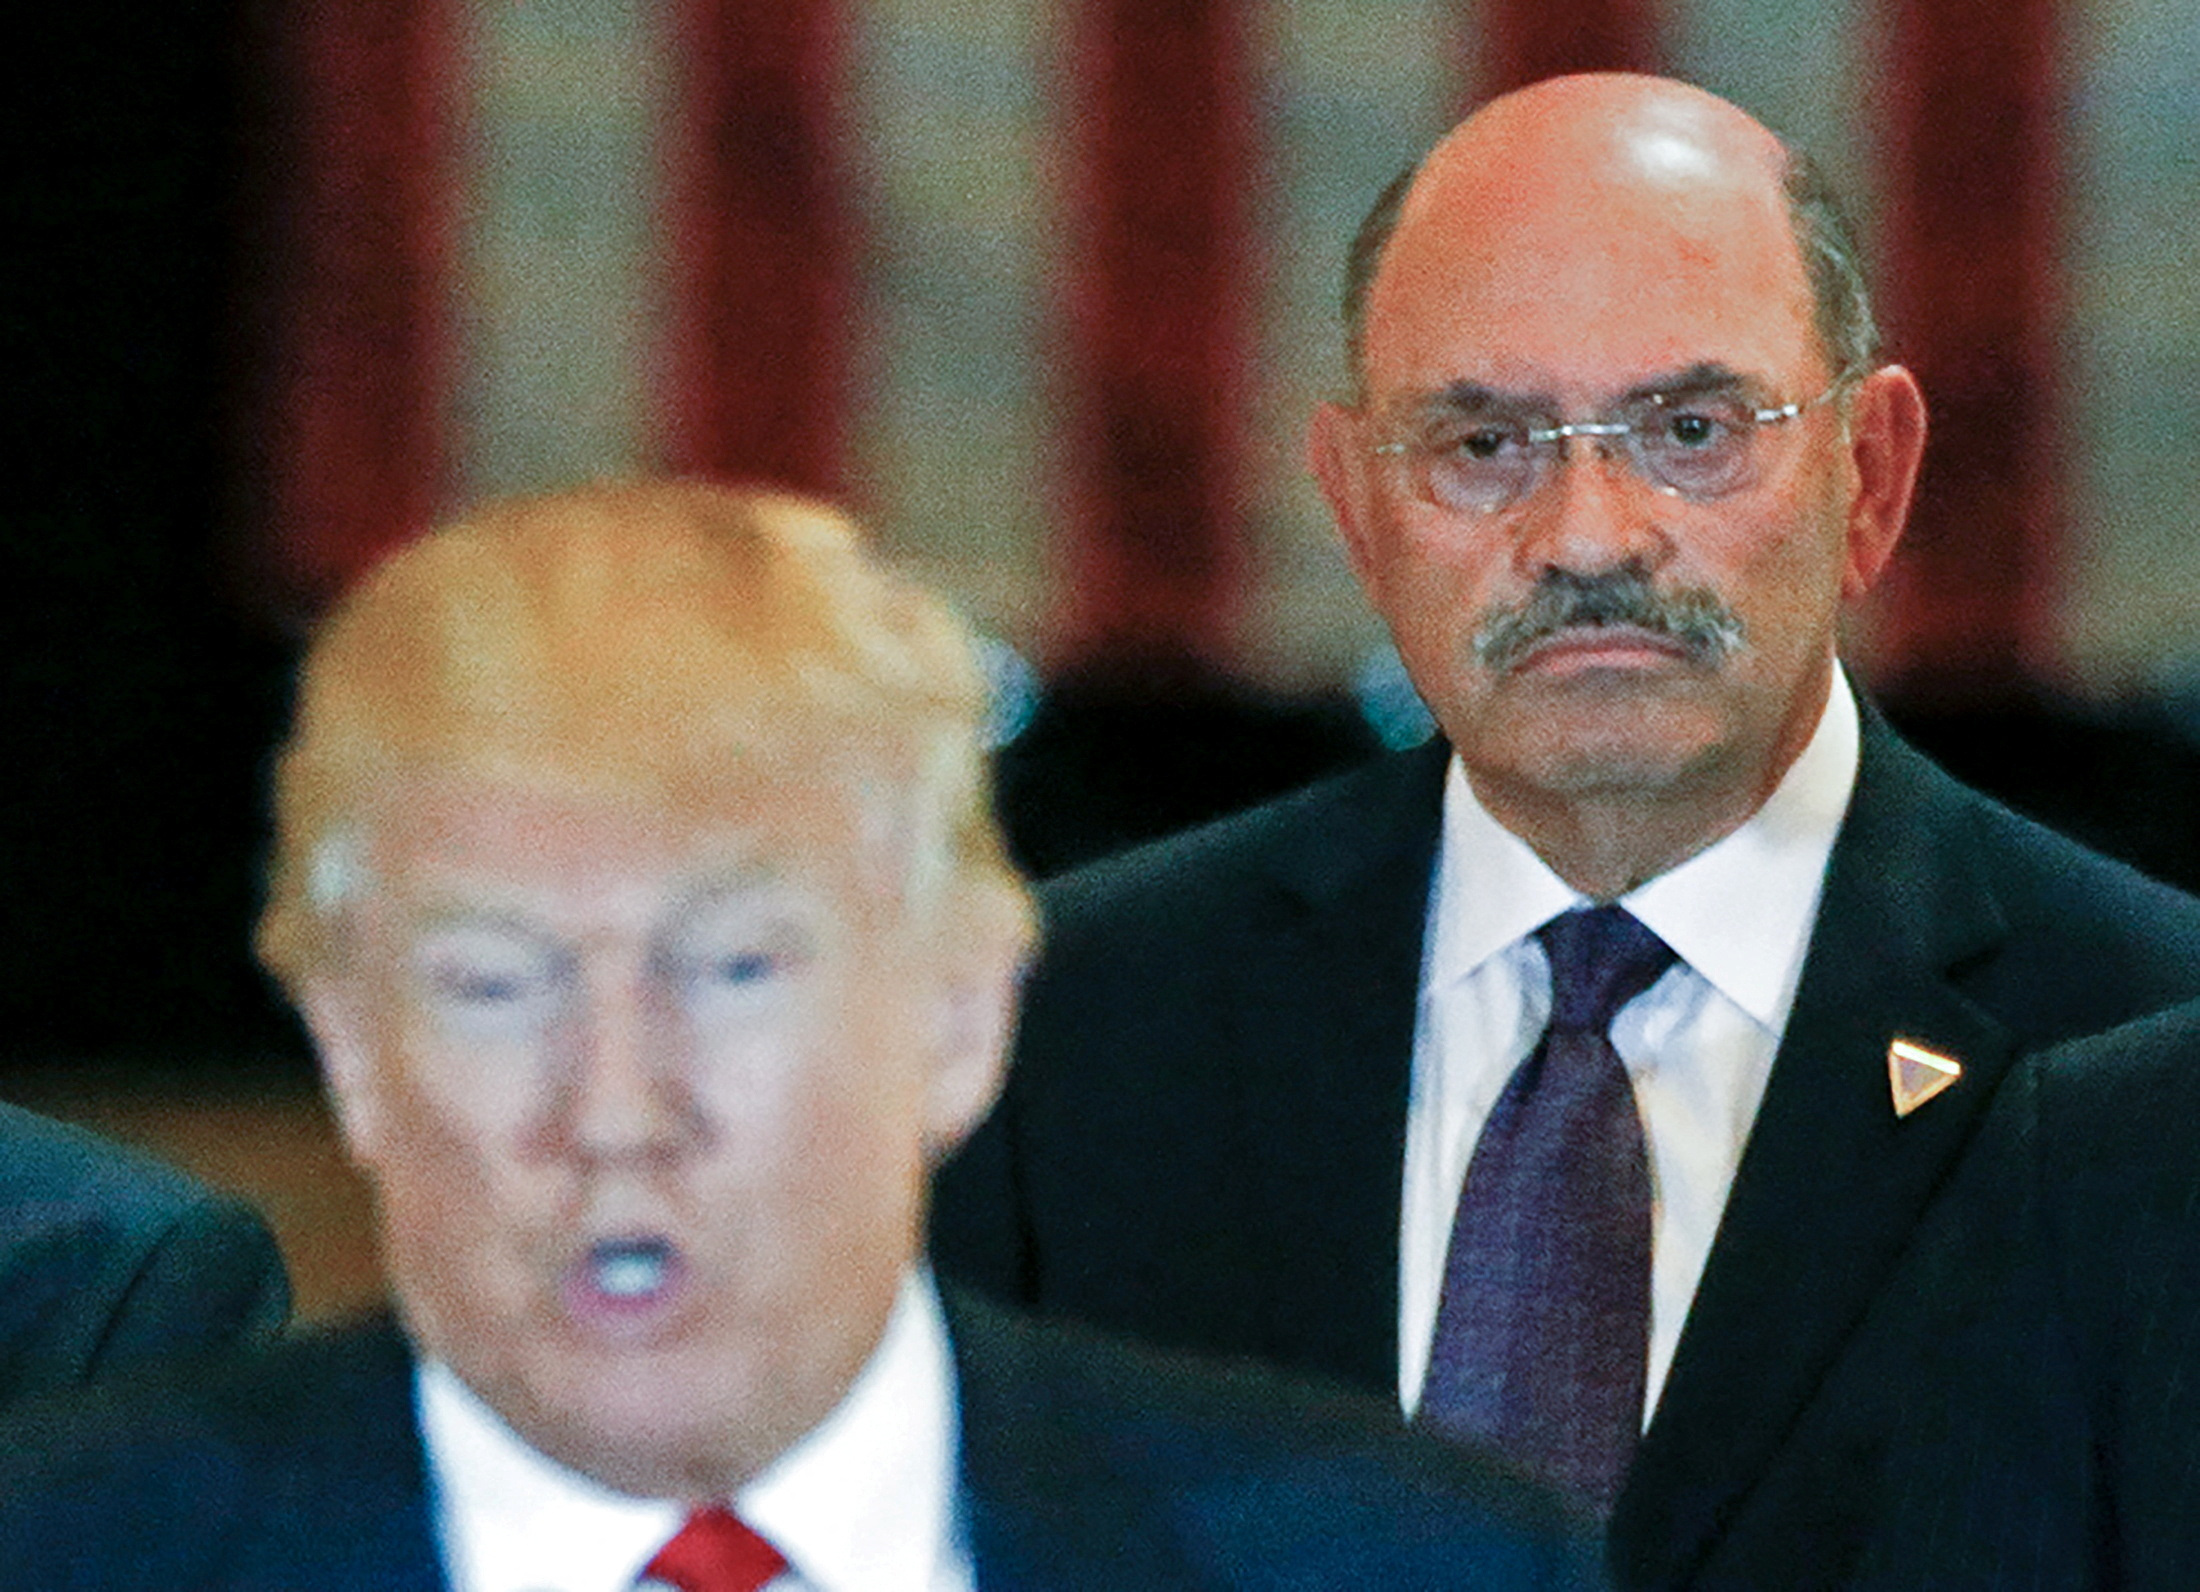 Longtime Trump Executive Allen Weisselberg Pleads Guilty to Aiding Tax Fraud, Becomes prosecution witness